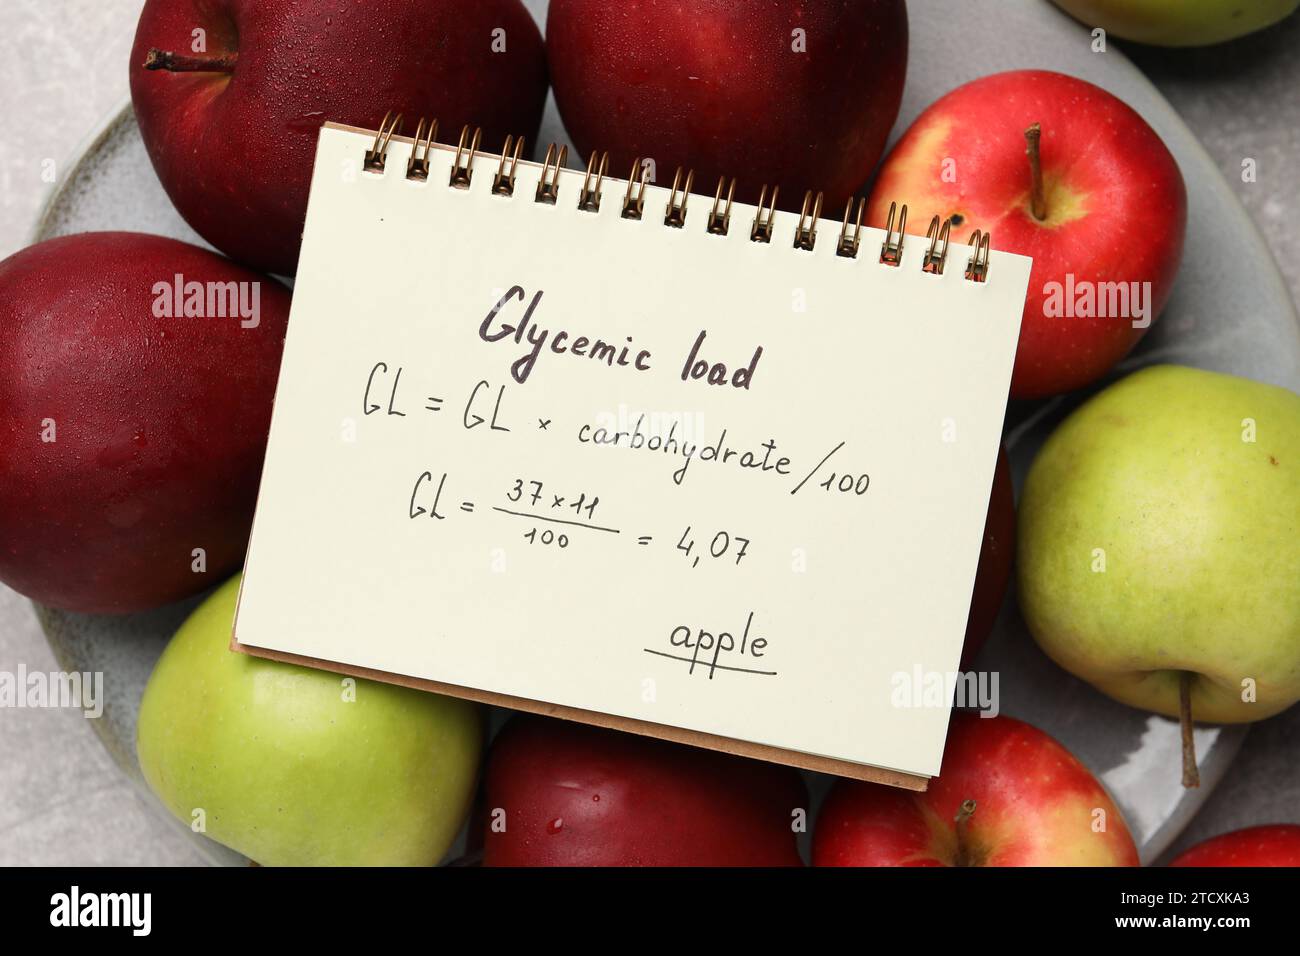 Notebook with calculated glycemic load for apples and fresh fruits on table, top view Stock Photo